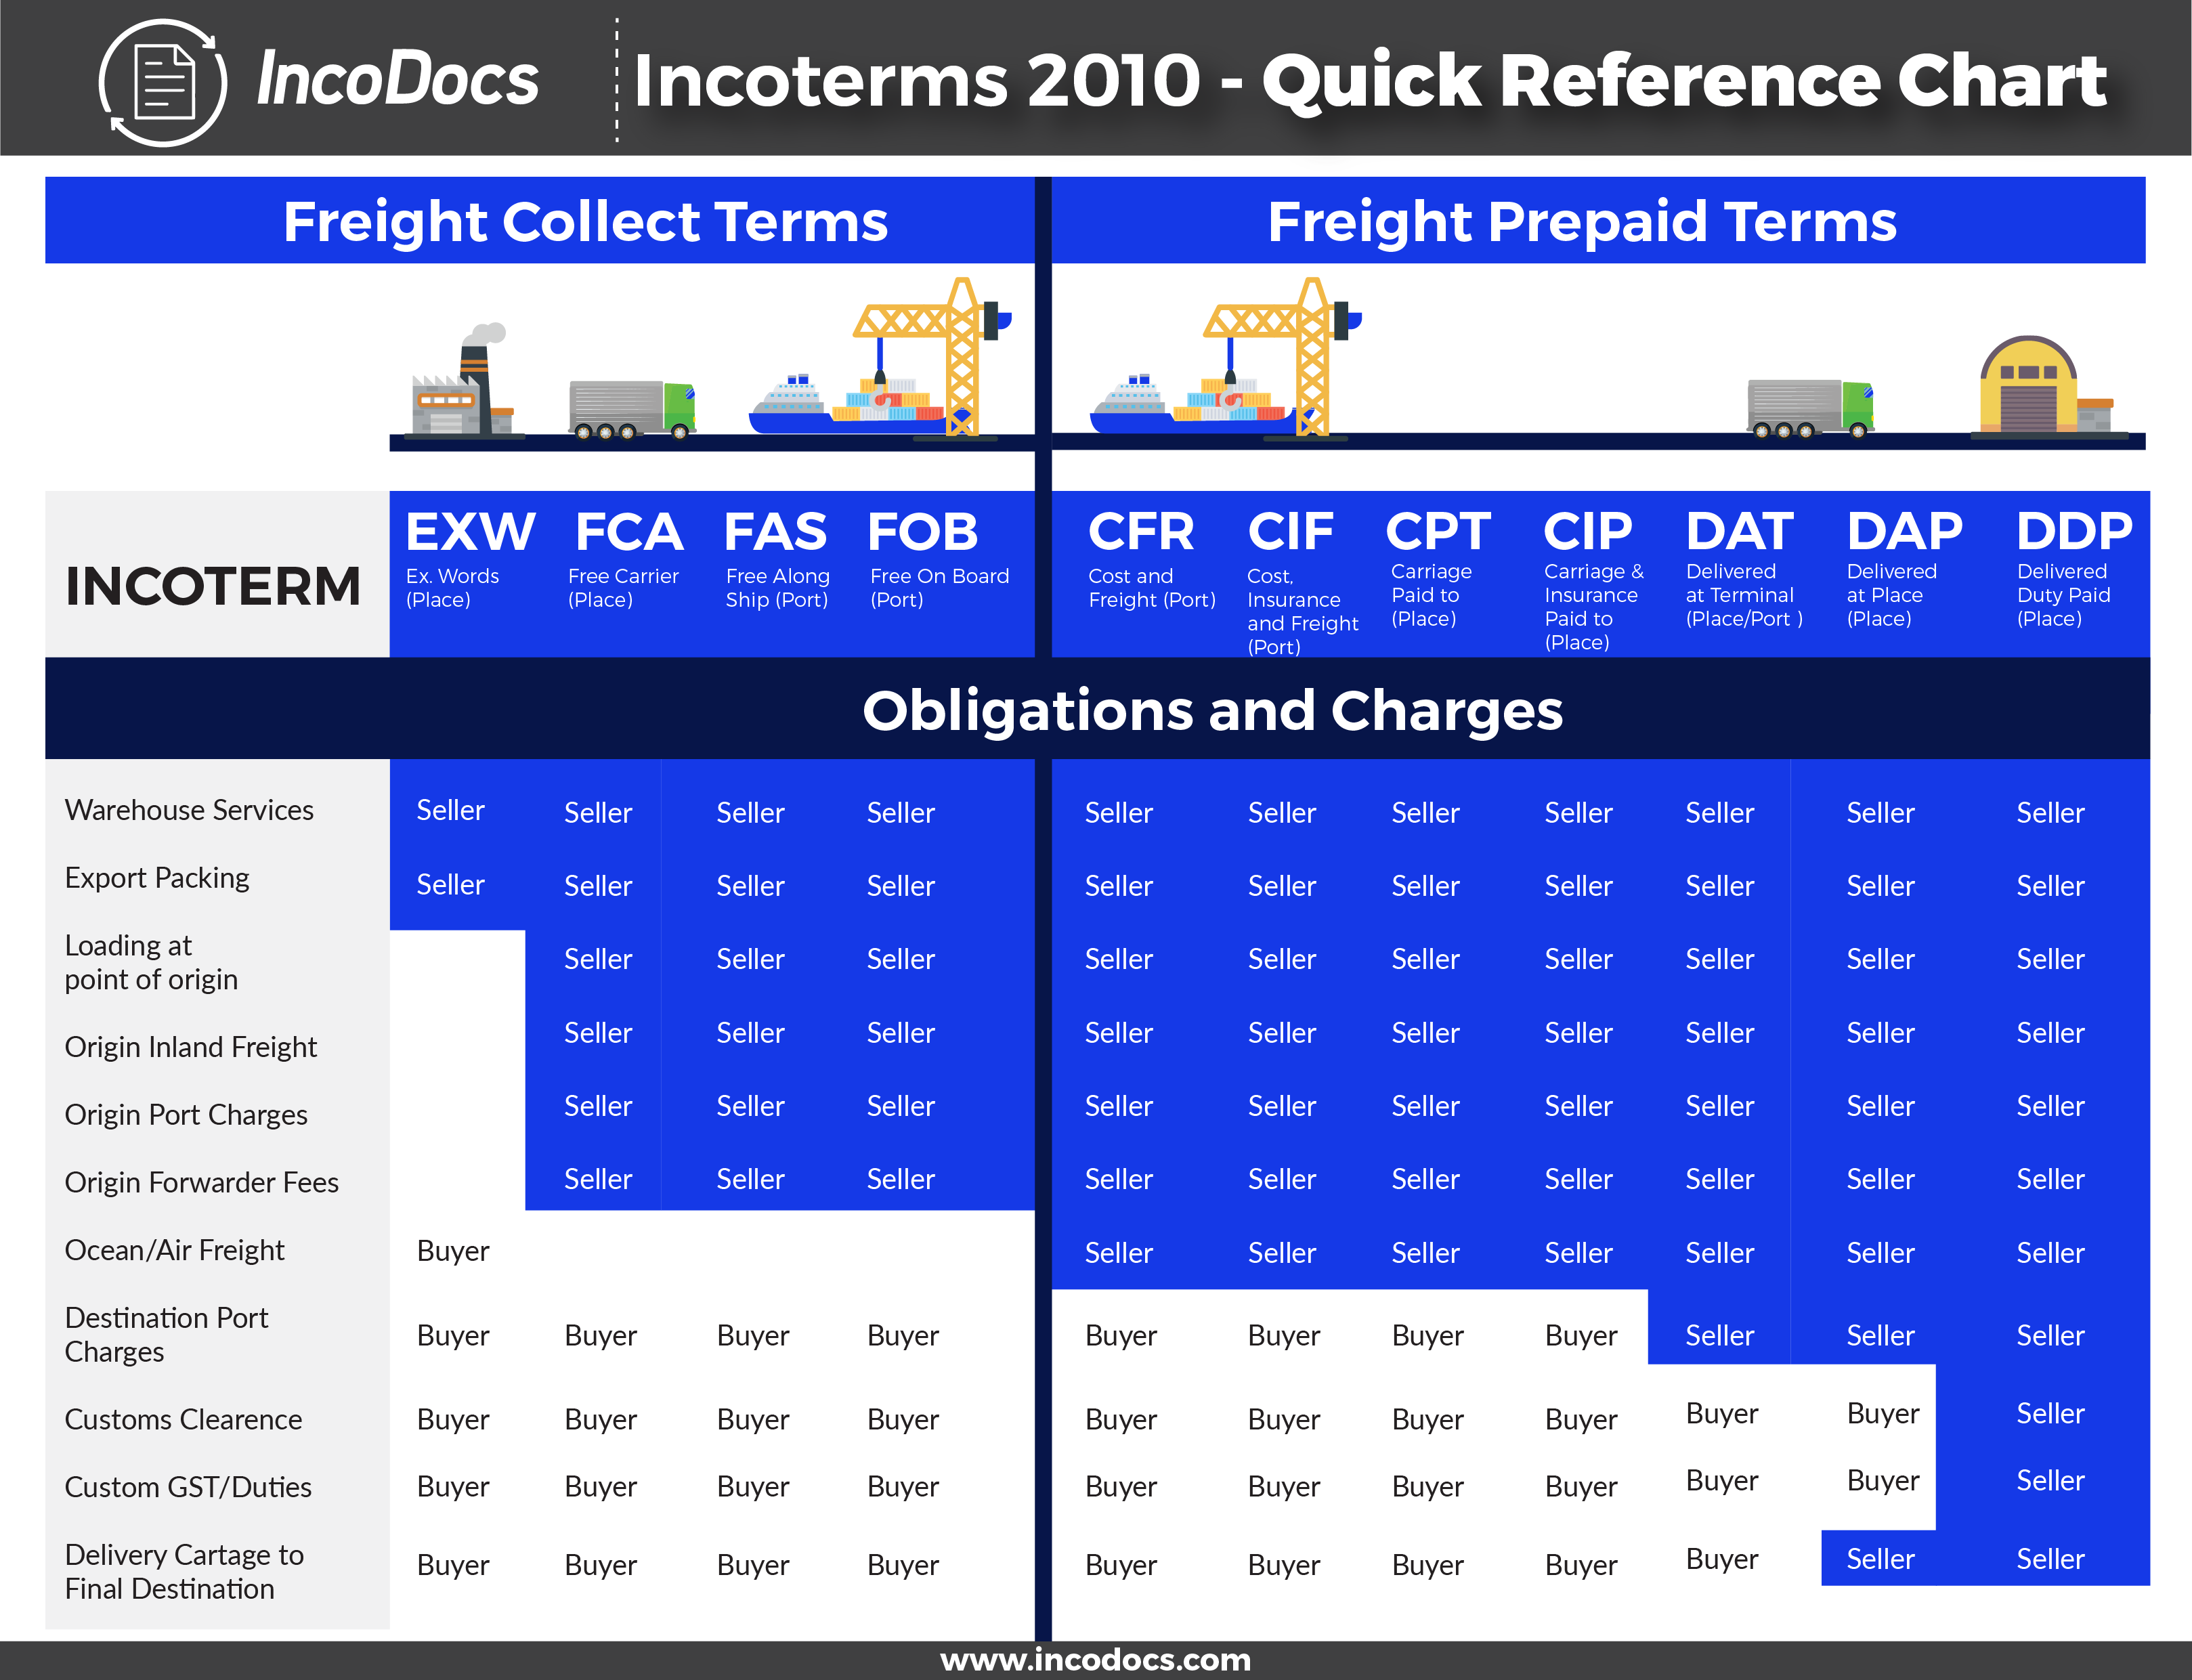 Incoterms® Explained The Complete Guide Incodocs 9653